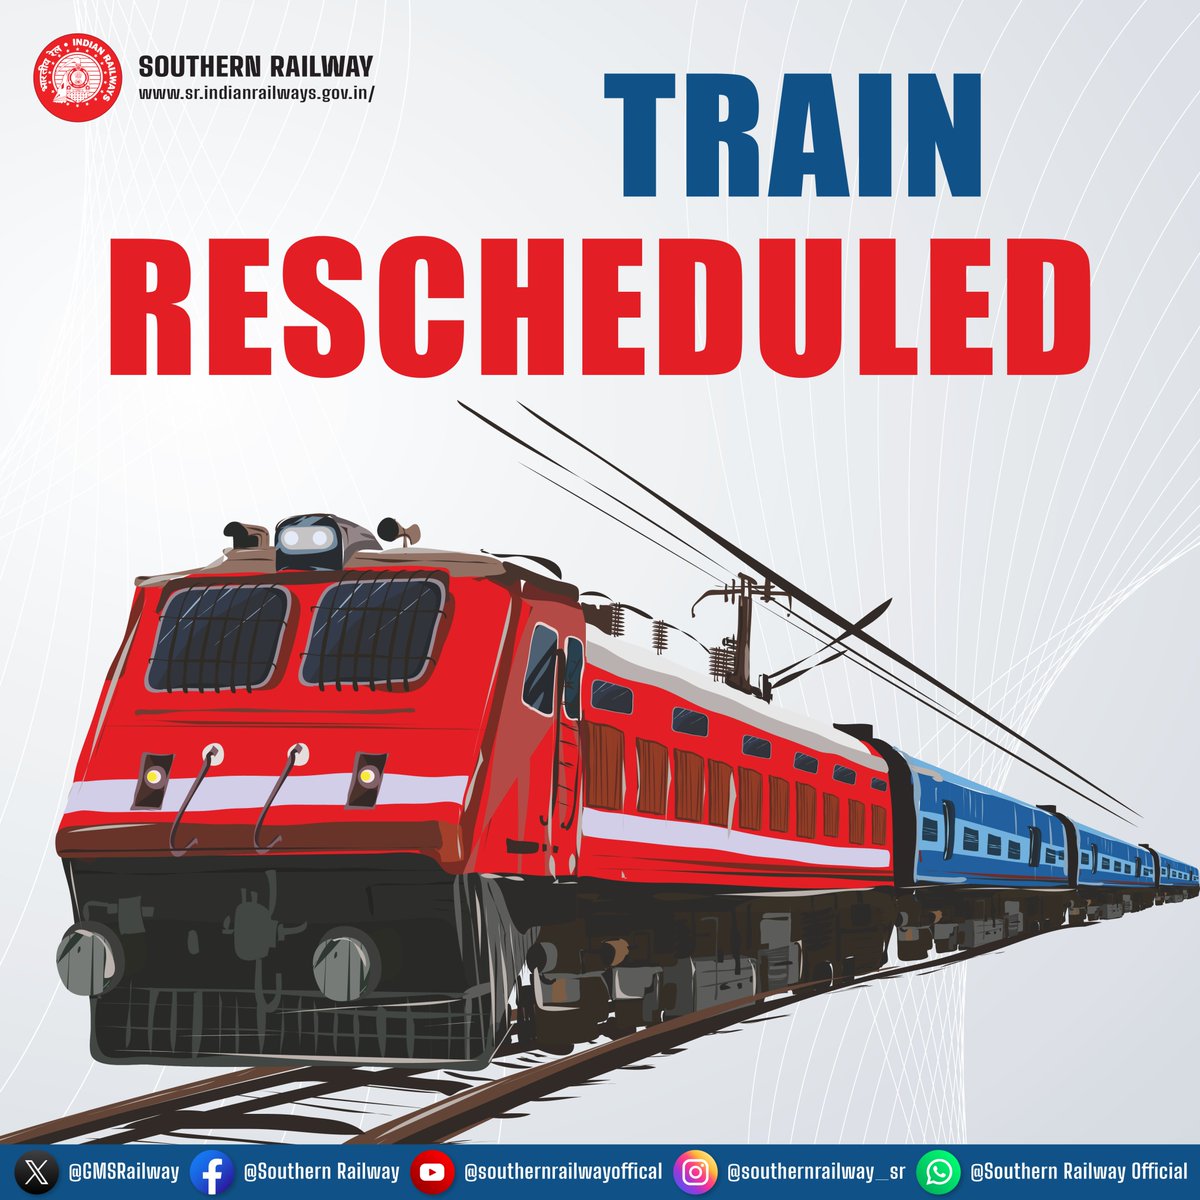 Rescheduling of Train Service

Train No. 17643 Puducherry - Kakinada Port Circar Express scheduled to leave Puducherry at 13.30 hrs on 20.05.2024 (Today) is rescheduled to leave Puducherry at 15.30 hrs due to late running of pairing train (Late by 2 hours)

#SouthernRailway